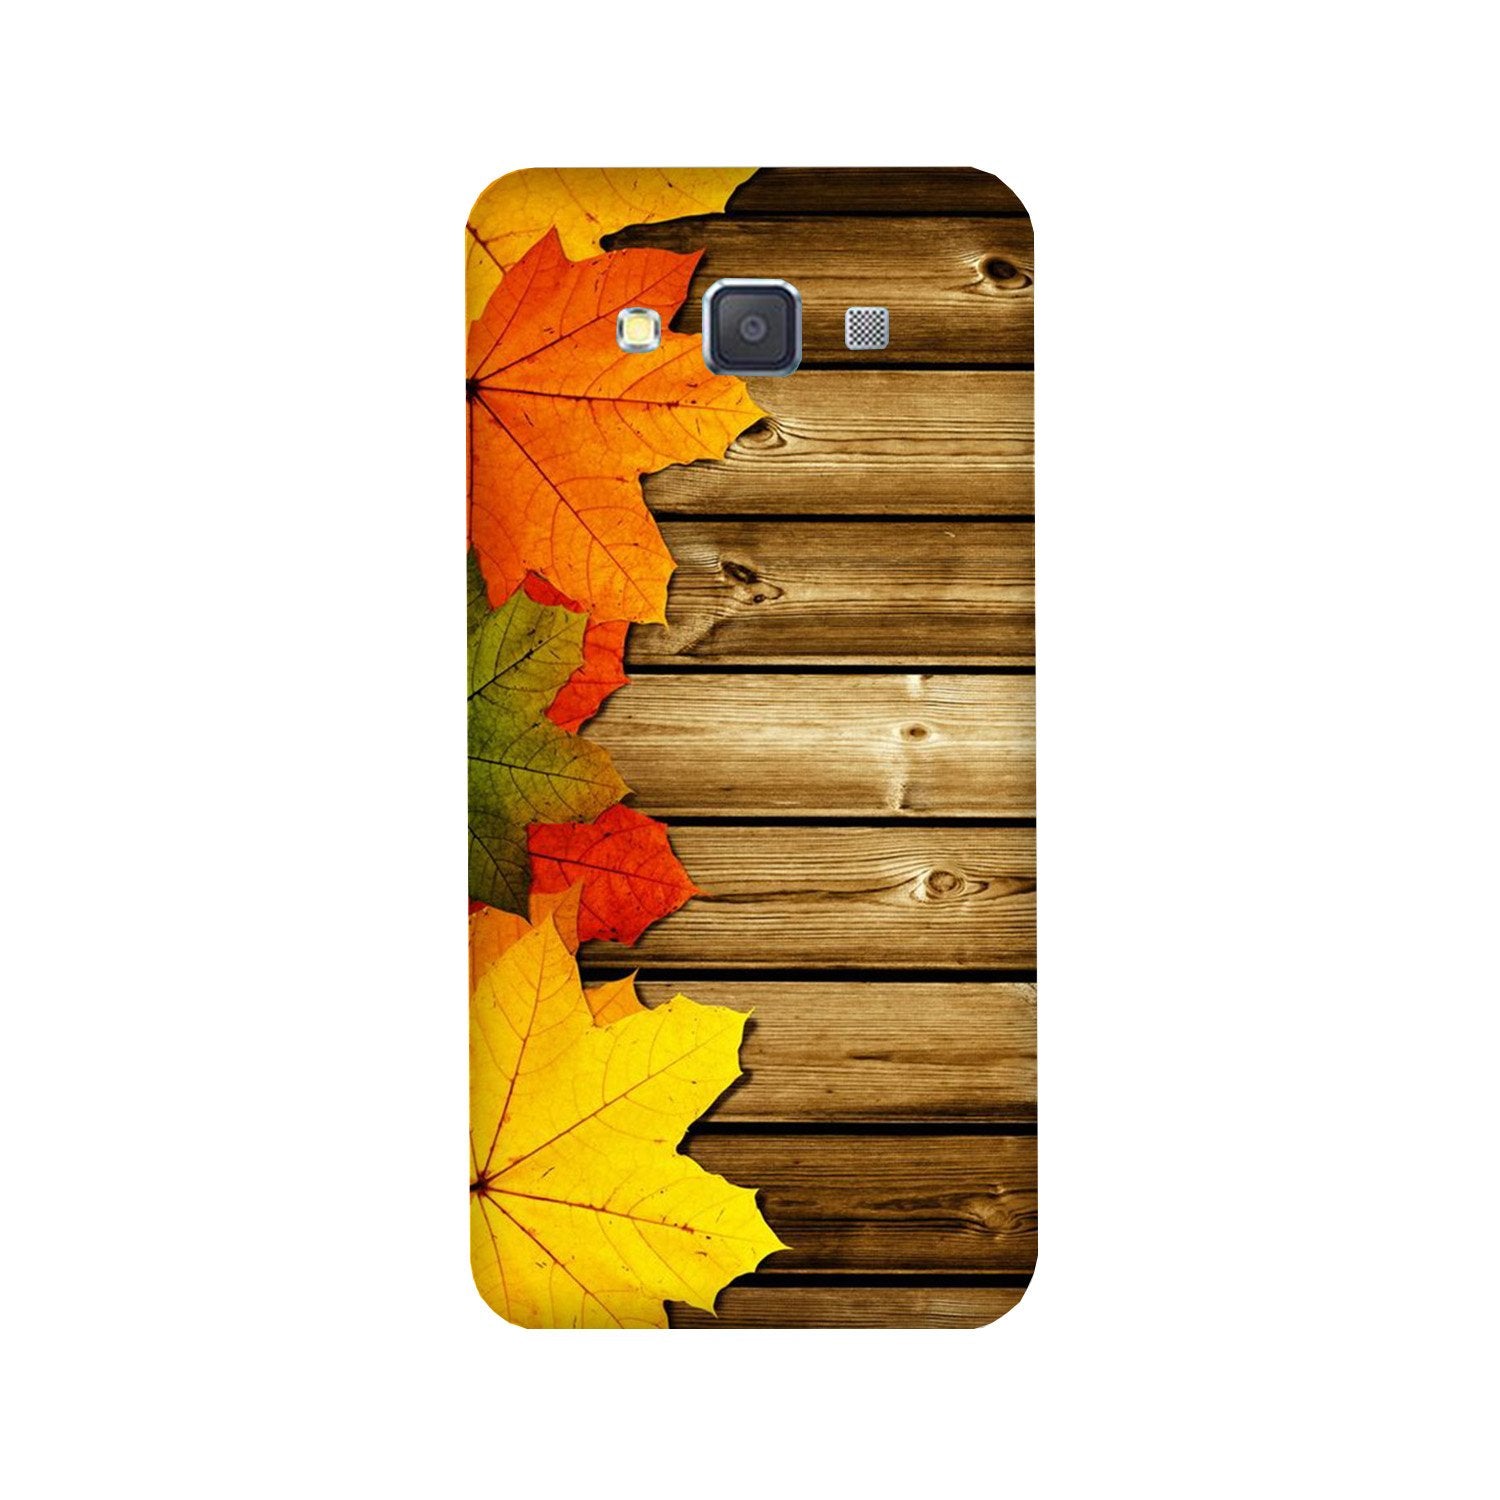 Wooden look3 Case for Galaxy Grand 2